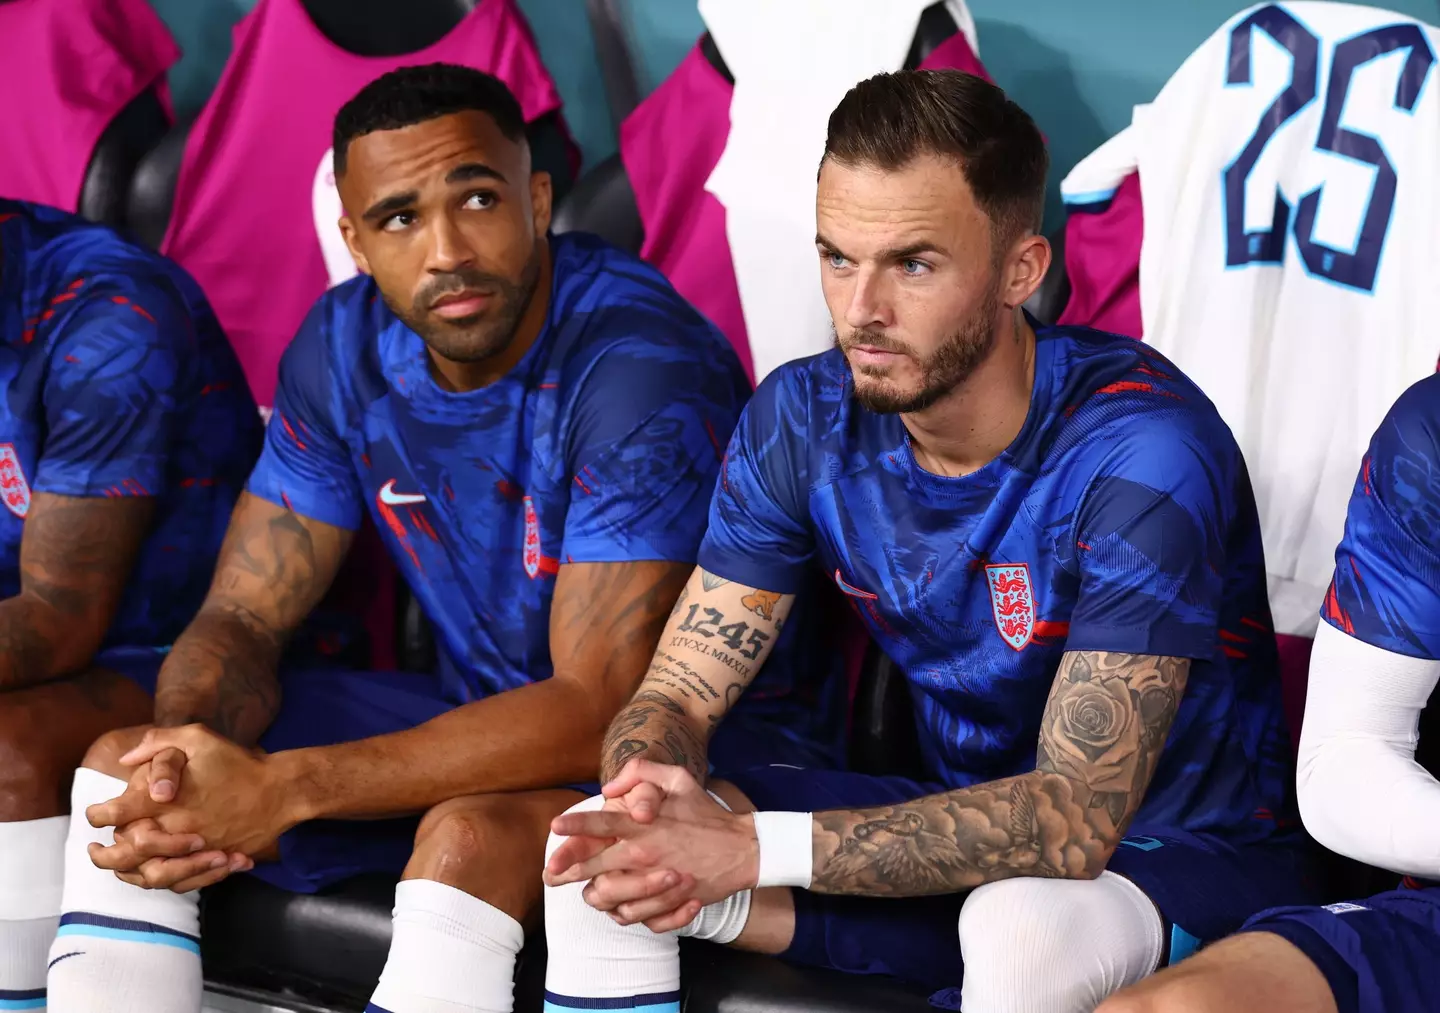 Newcastle striker Callum Wilson [left] with Leicester City star James Maddison [right] on the England bench at the World Cup in Qatar.